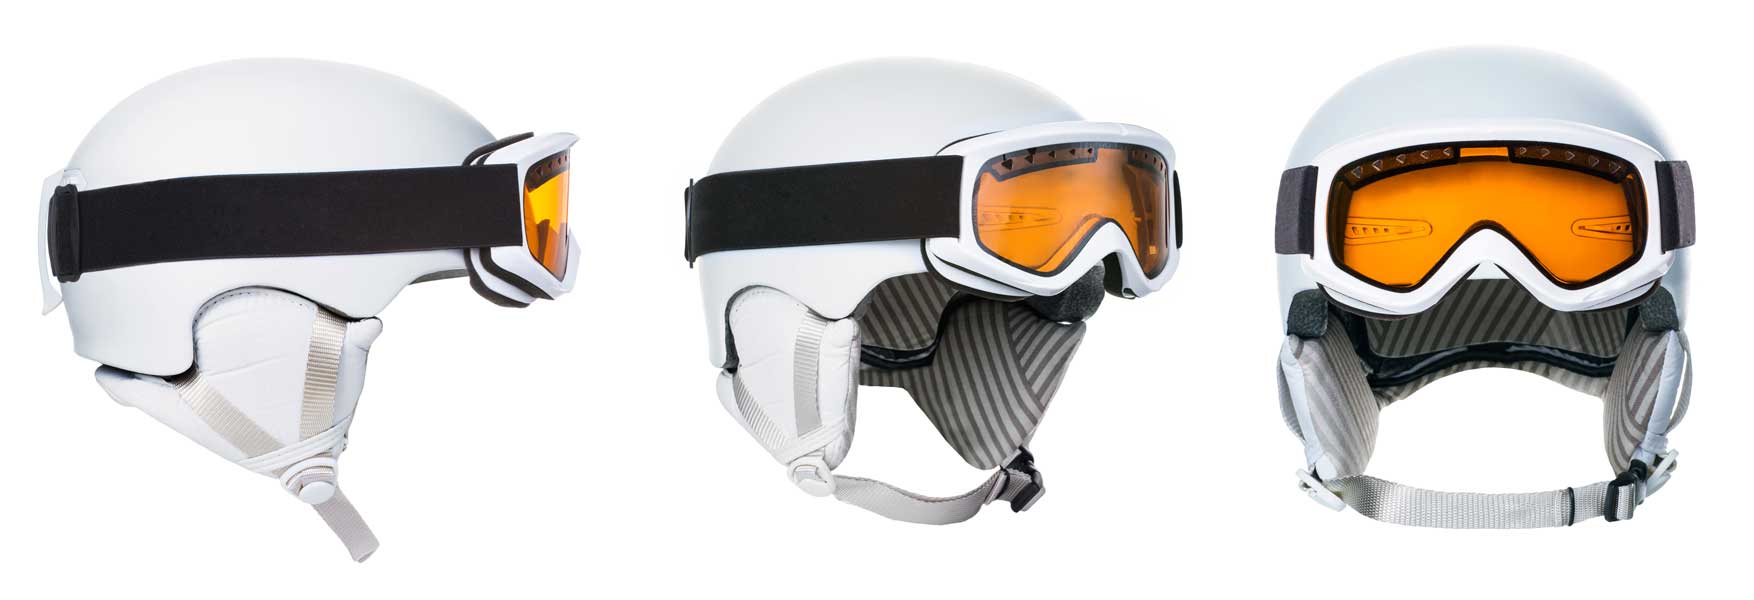 Our ski helmet rental shop will get you kitted with everything you need for a safe and exciting vacation